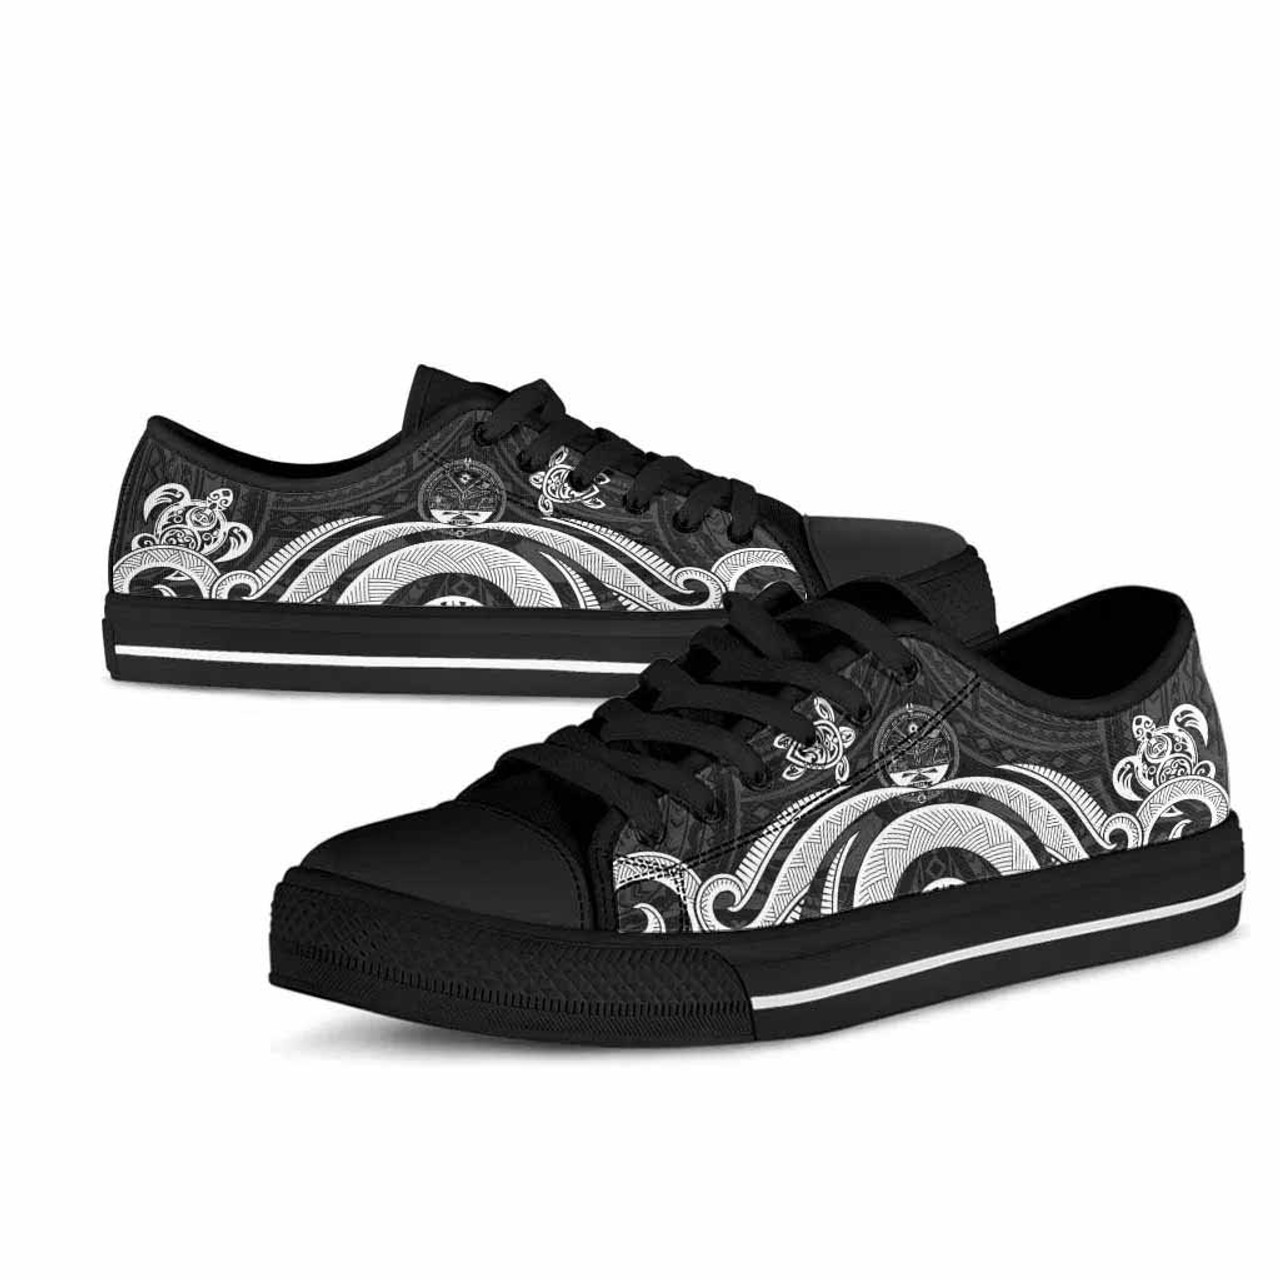 Marshall Islands Low Top Canvas Shoes - White Tentacle Turtle Crest 4